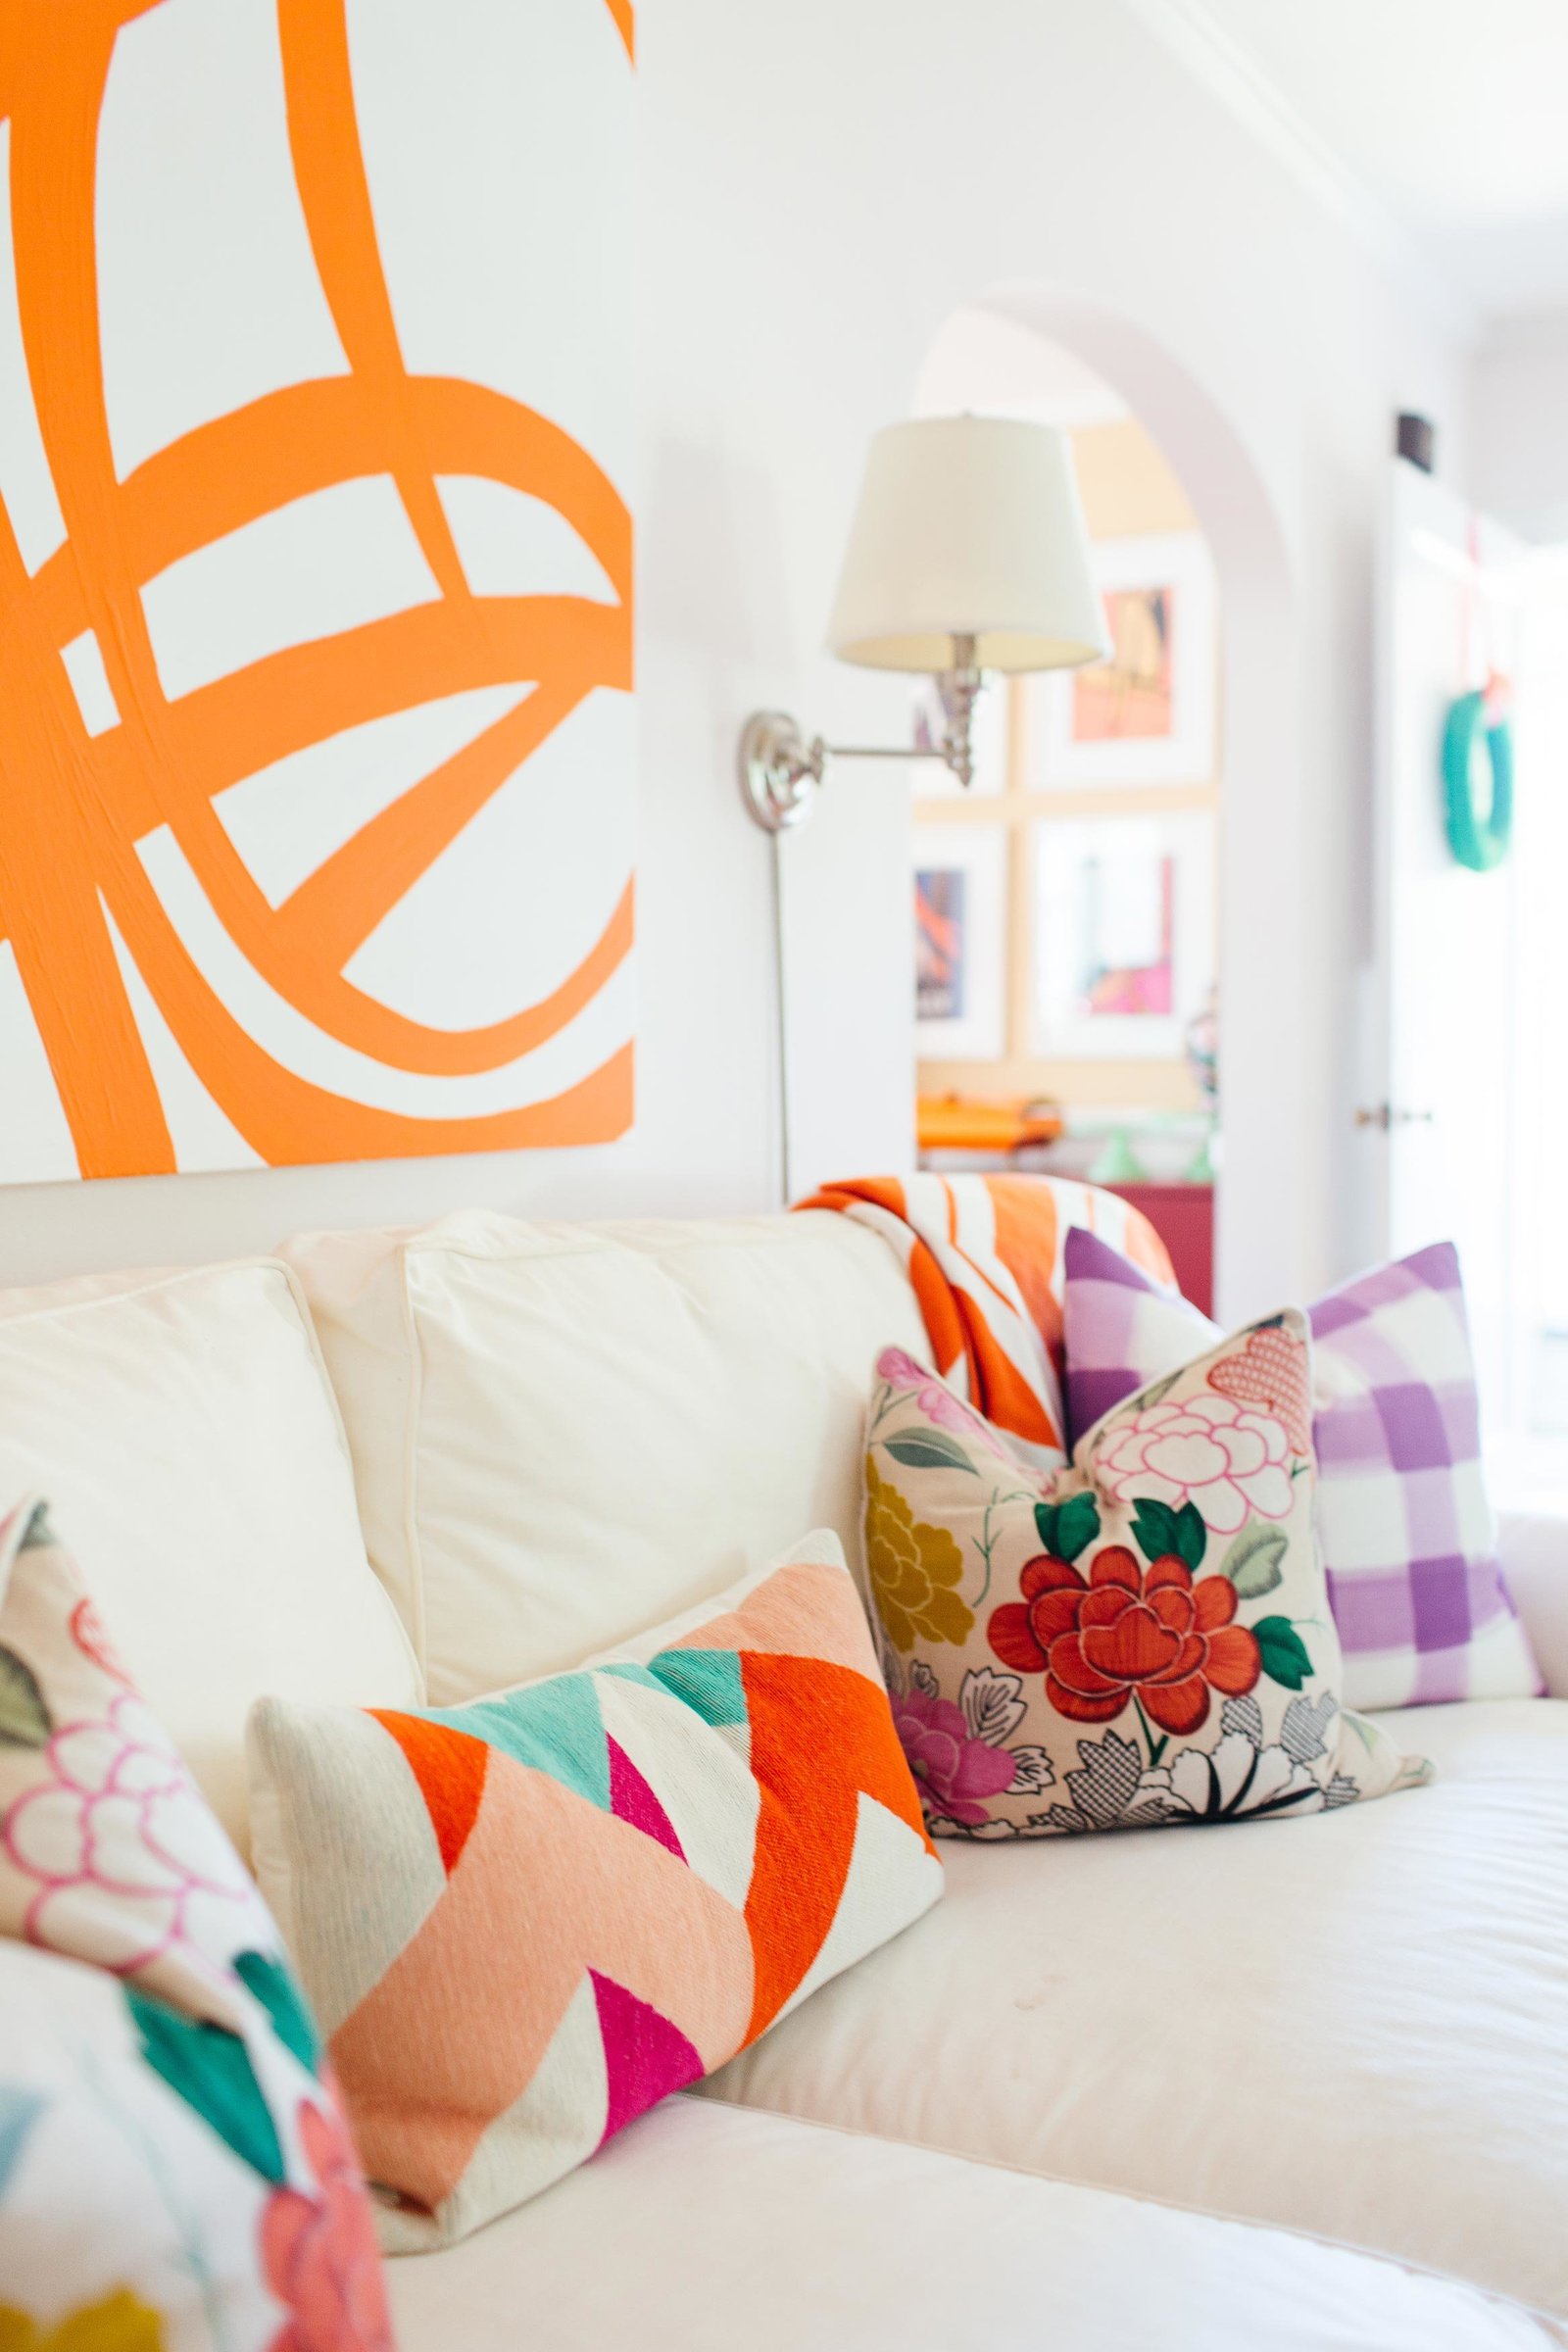 A living room with a large orange and white abstract painting and colorful throw pillows.